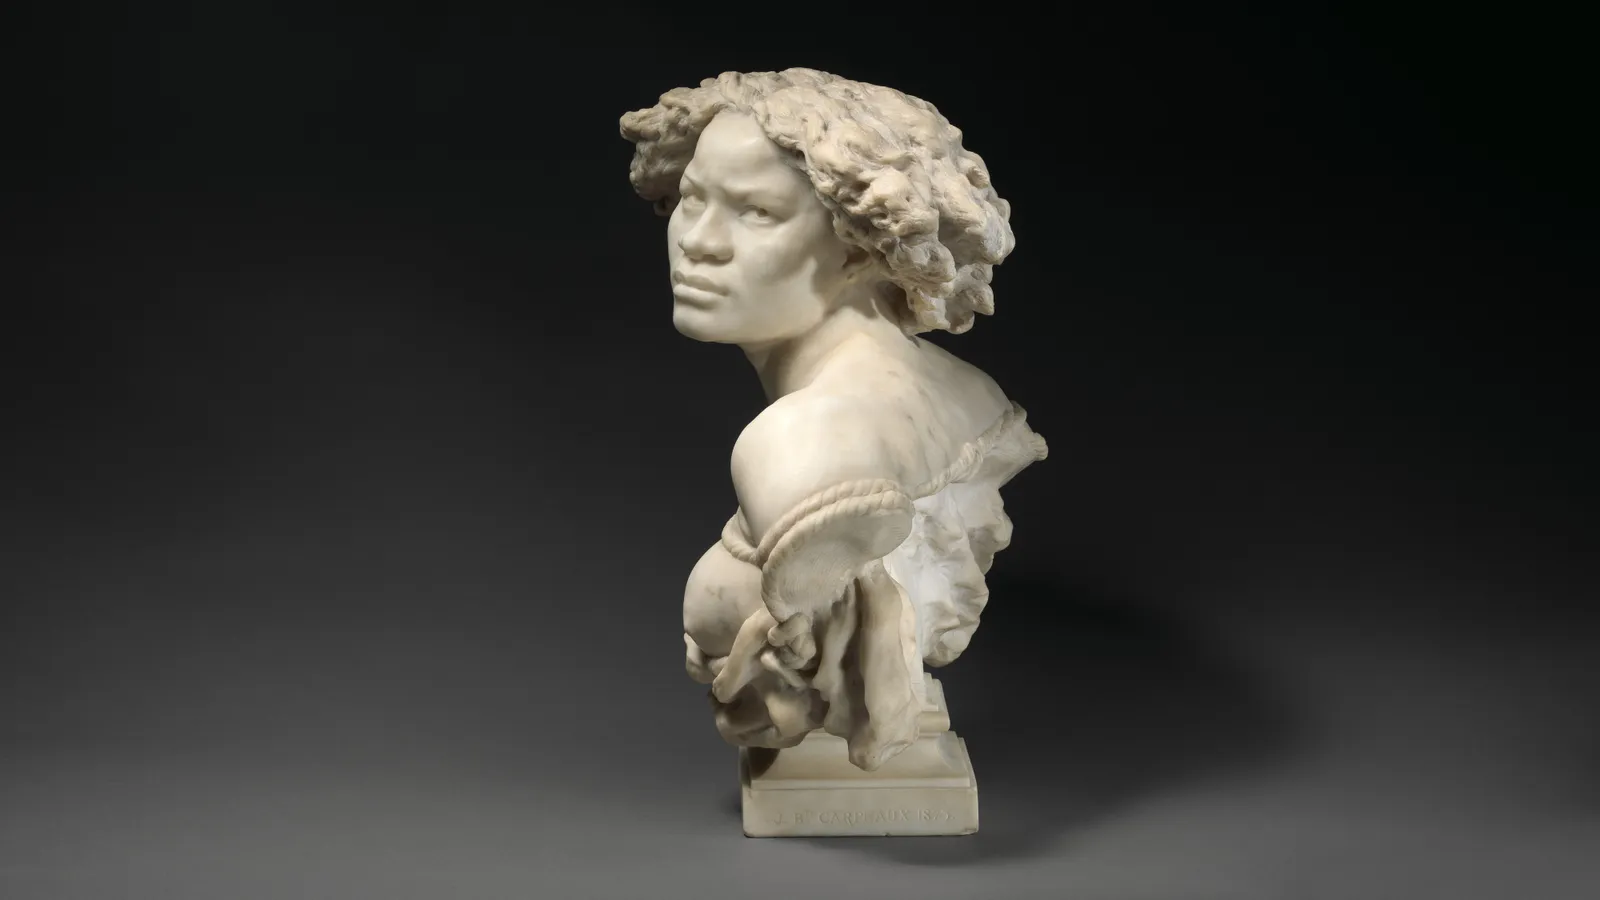 A Bold New Show at the Met Explores A Single Sculpture, Smart News